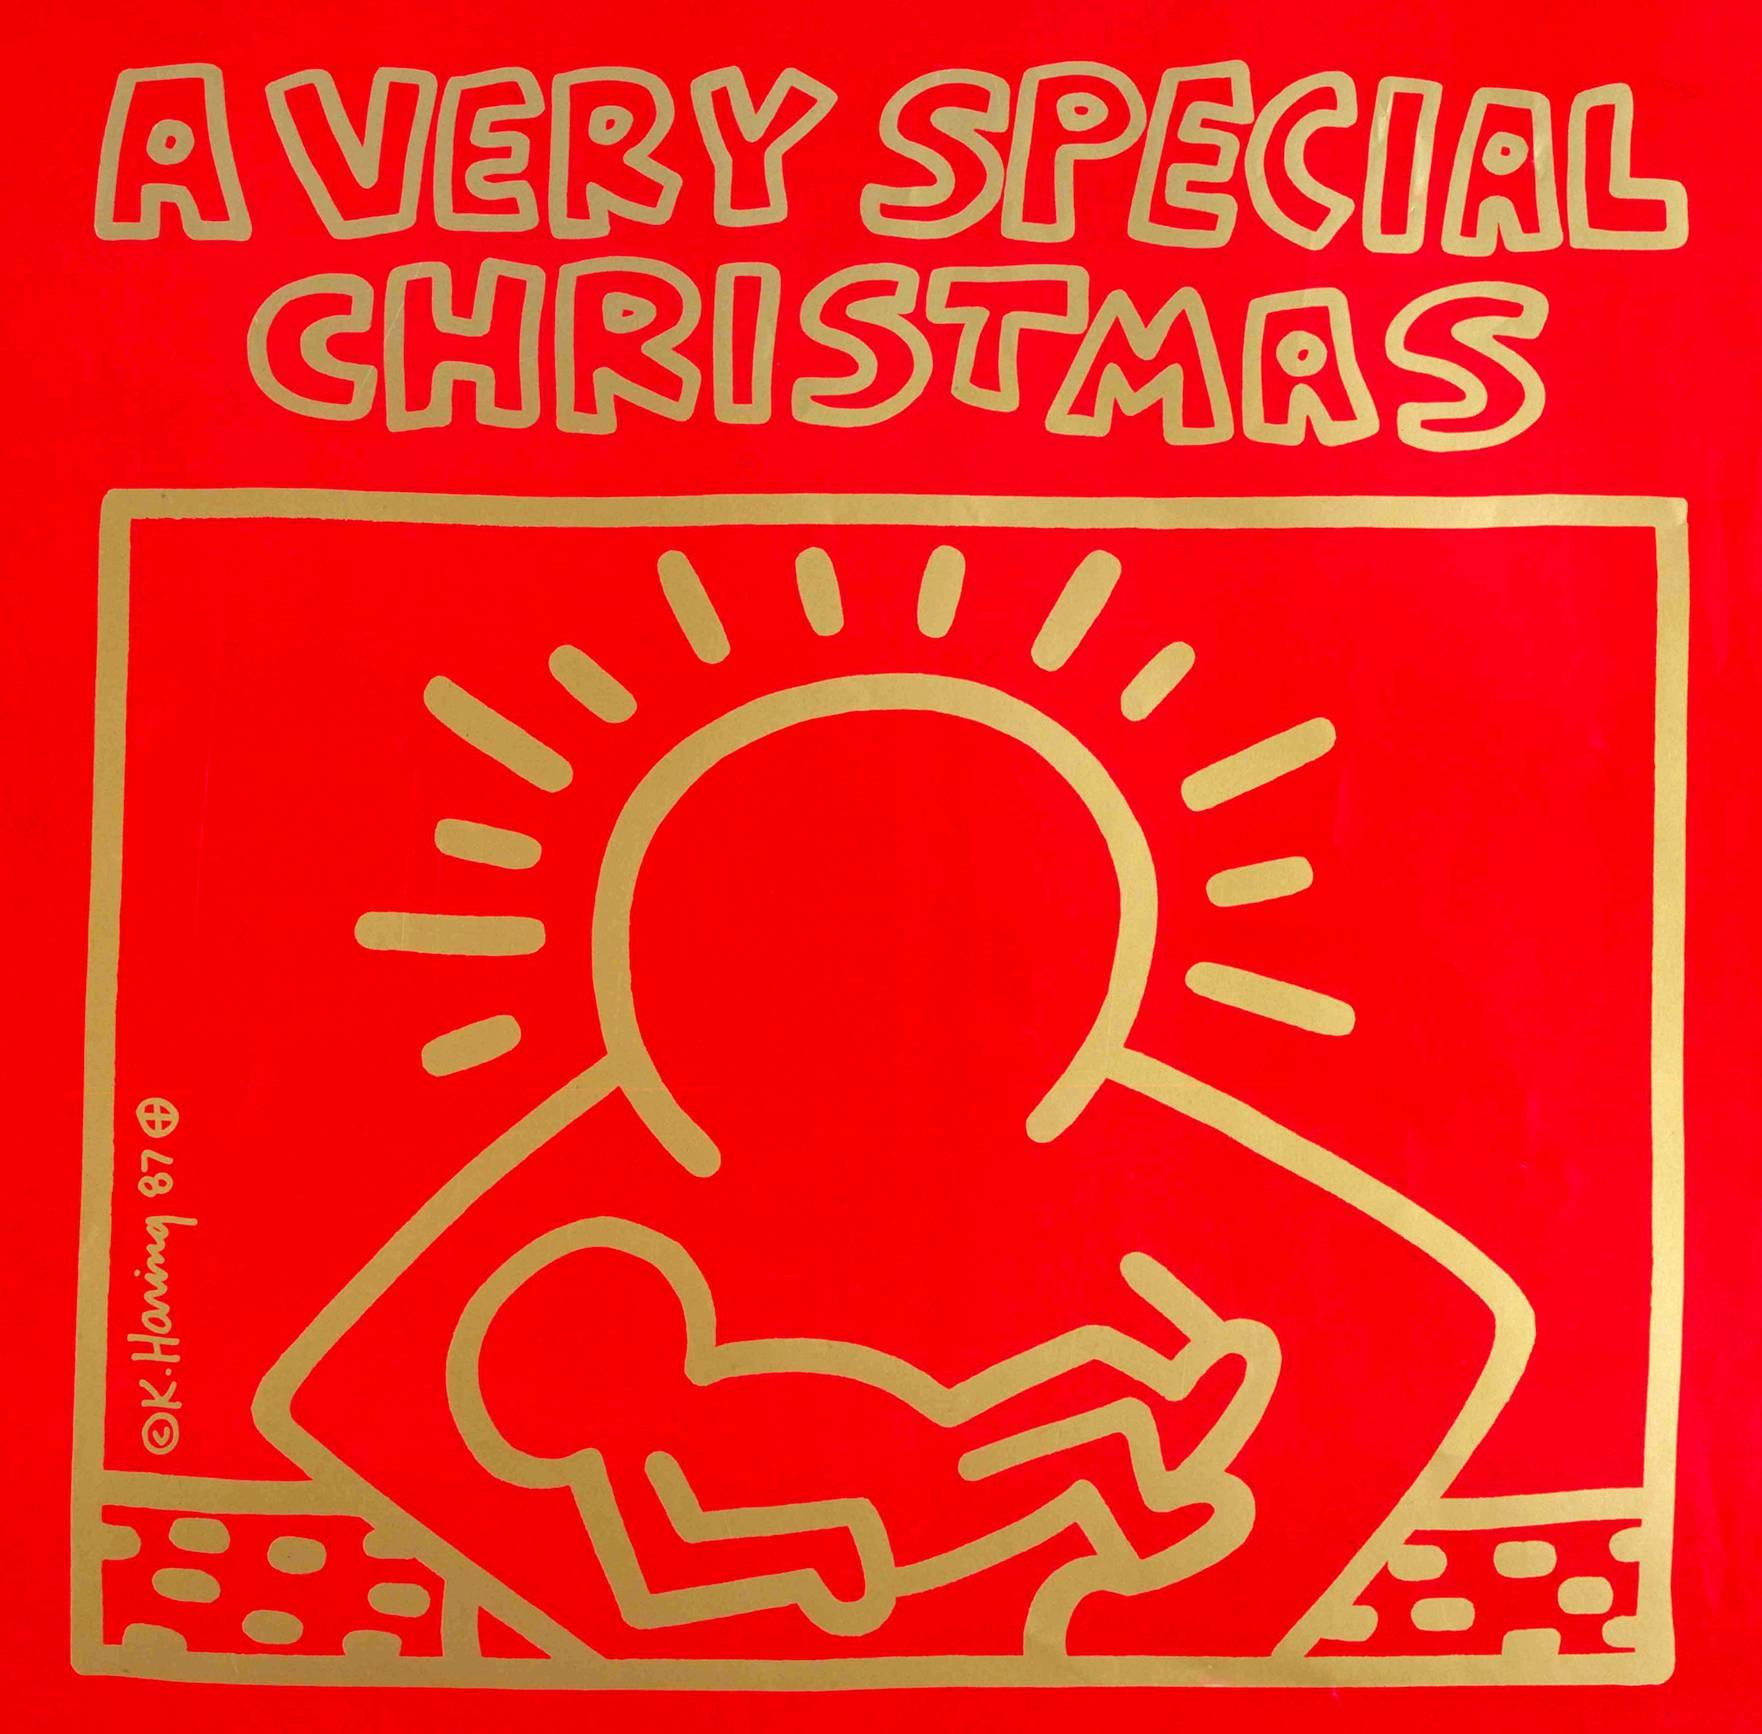 Original 1987 Vinyl Record Art by Keith Haring

Off-Set Lithograph on vinyl record jacket; engraved gold foil
12 x 12 inches 
Plate signed by Haring
Truly vibrant colors that make for stand-out wall art 
Very good to excellent condition
Includes the